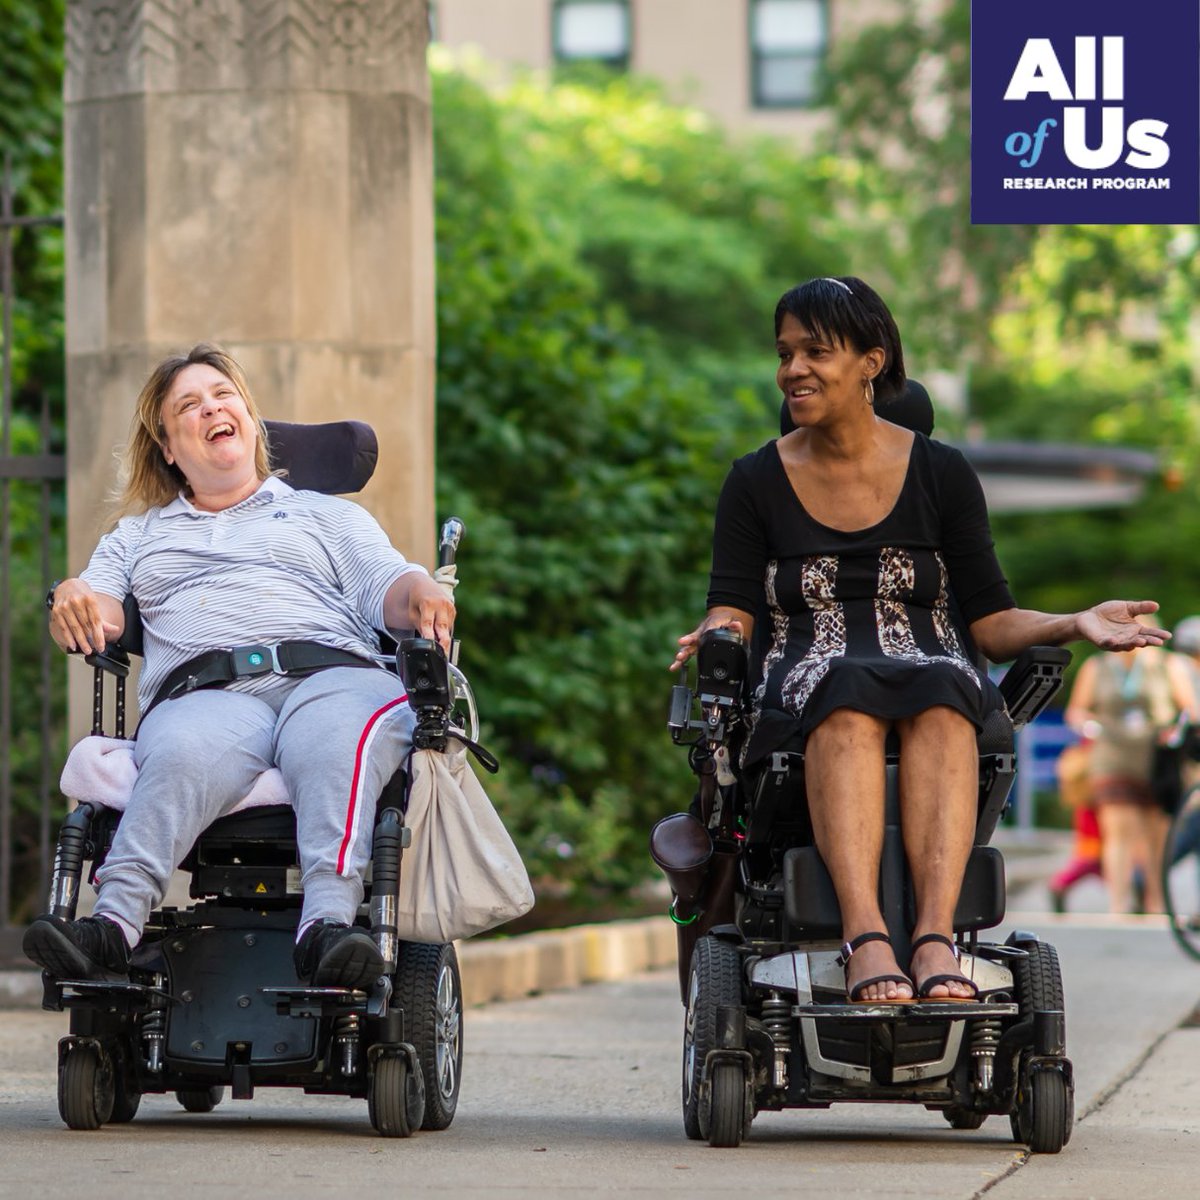 Mobility disabilities affect 1 in 7 adults. They are the most common type of disability. But the disability experience is different for everyone. This #MobilityAwareness Month, help make health research more inclusive: JoinAllofUs.org/Disability #AllofUsInclusion #JoinAllofUs